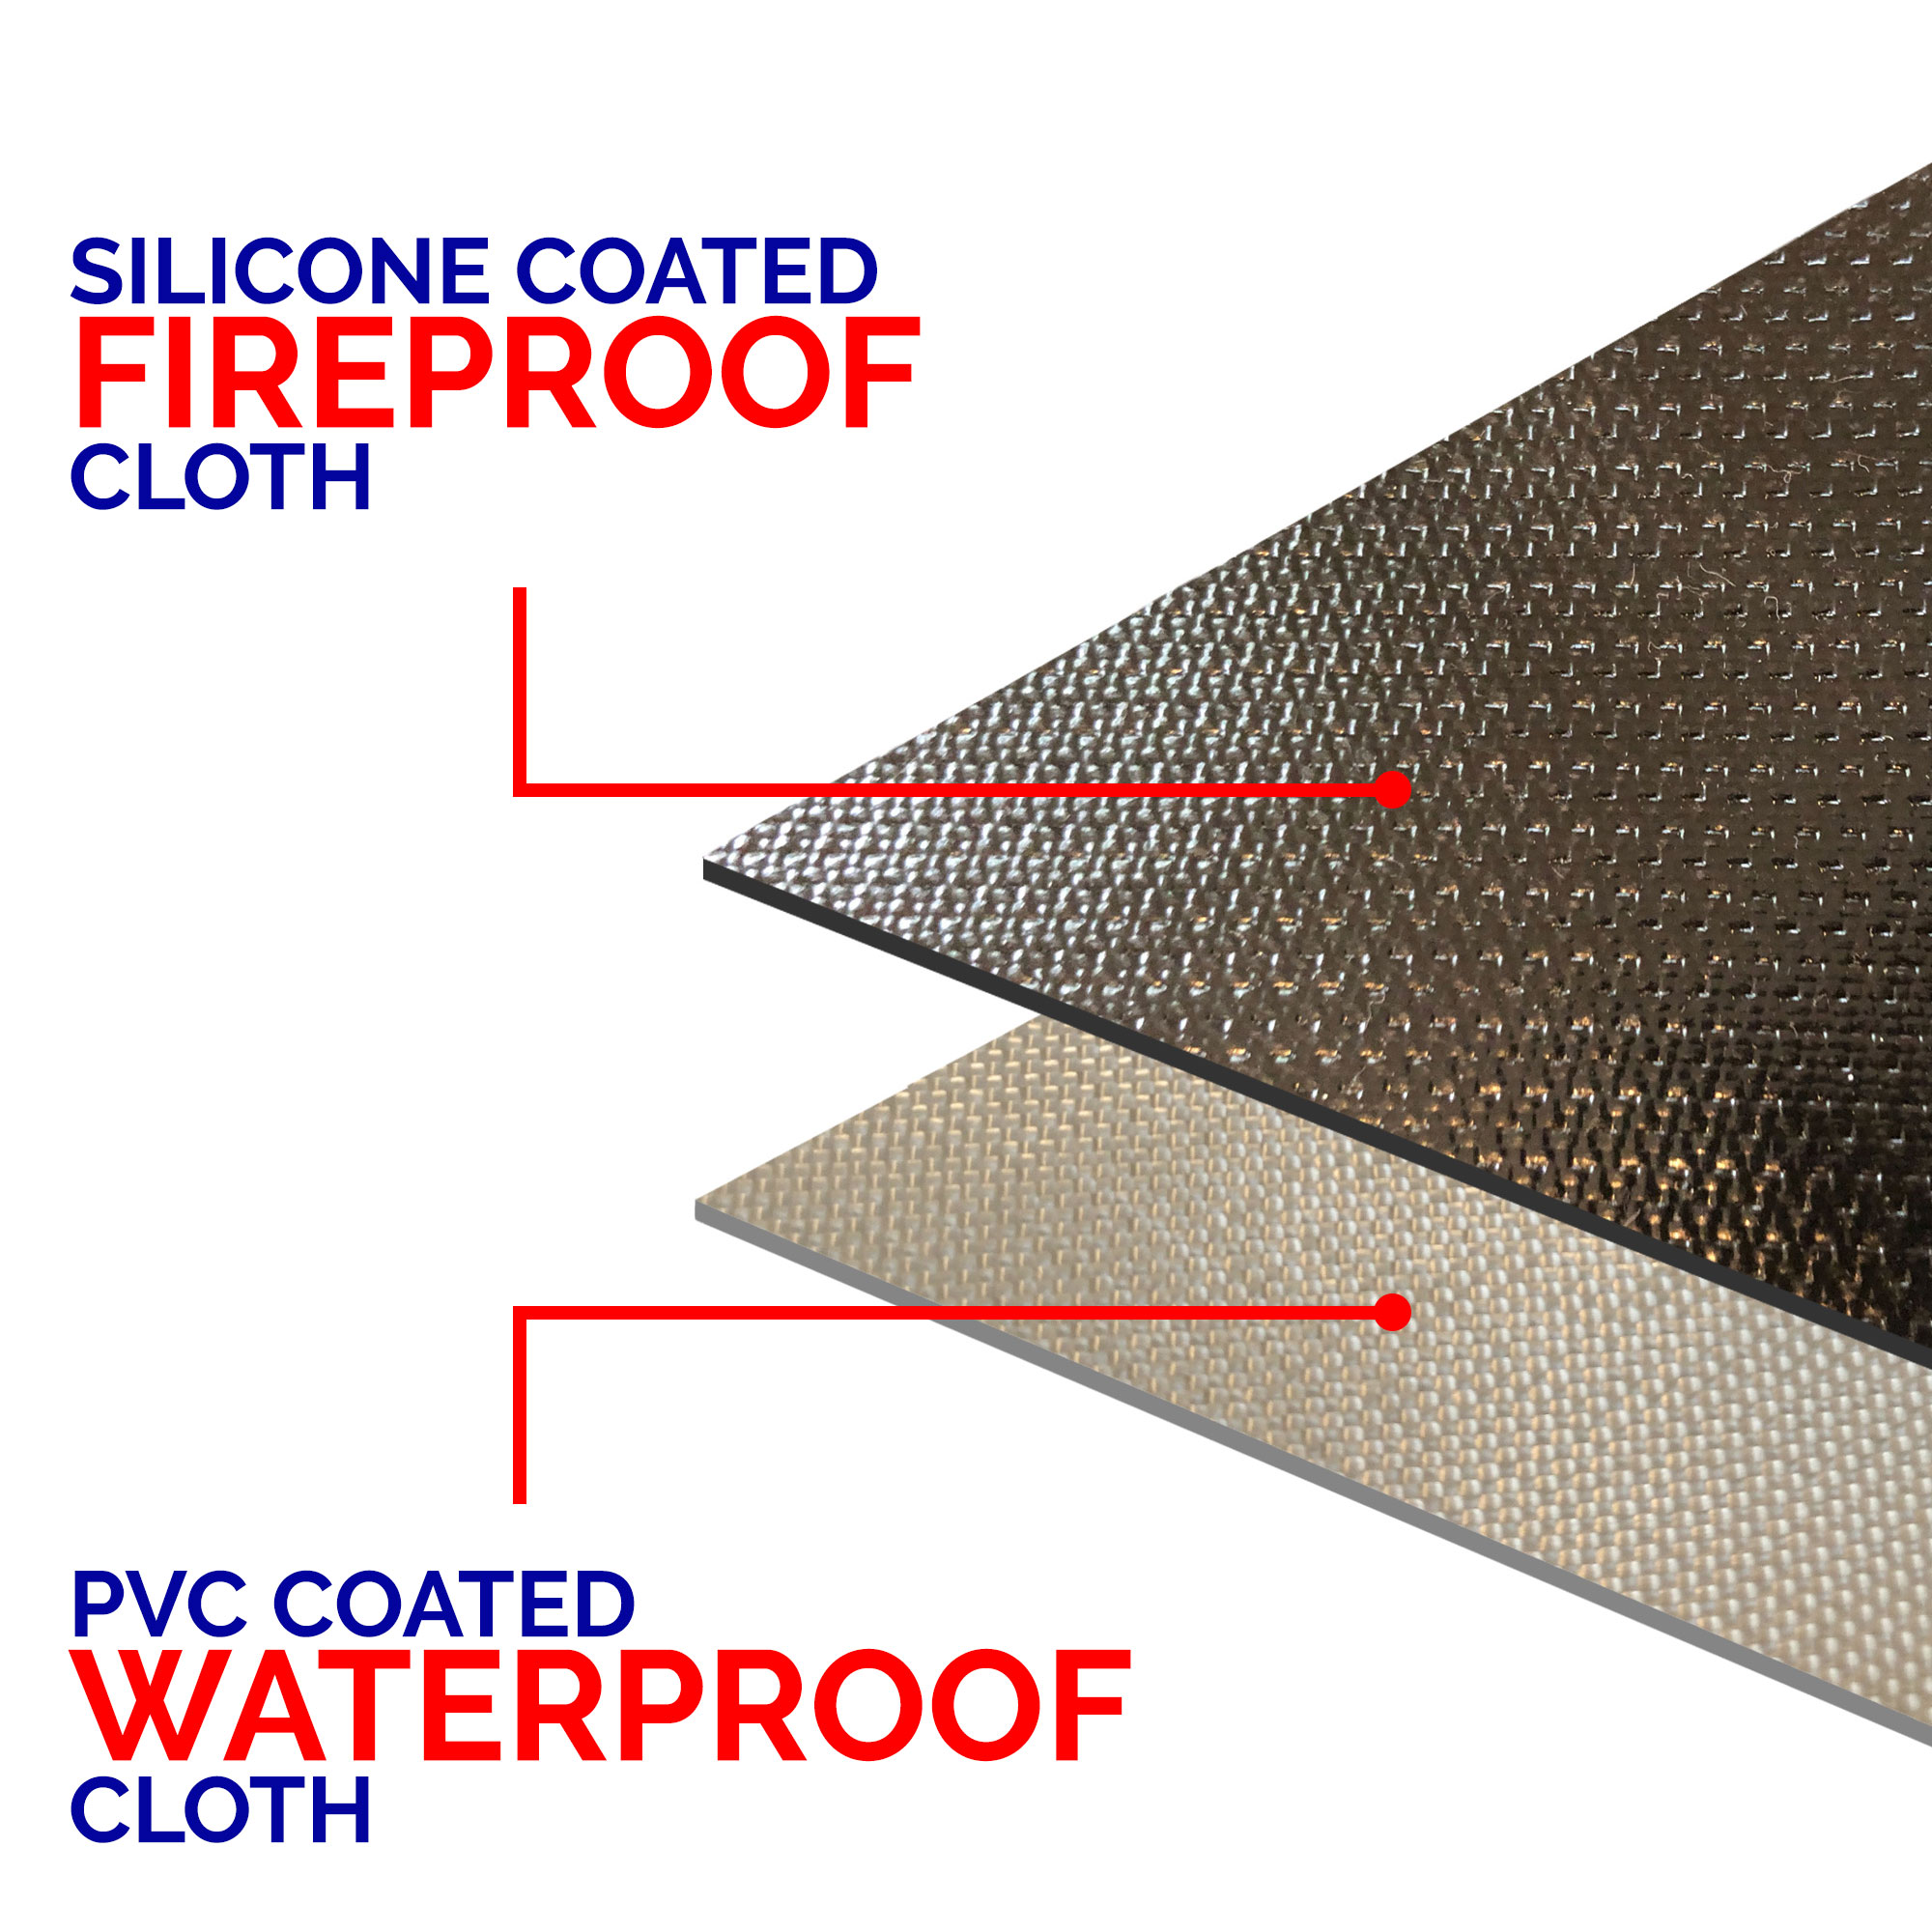 Fireproof and water resistant material